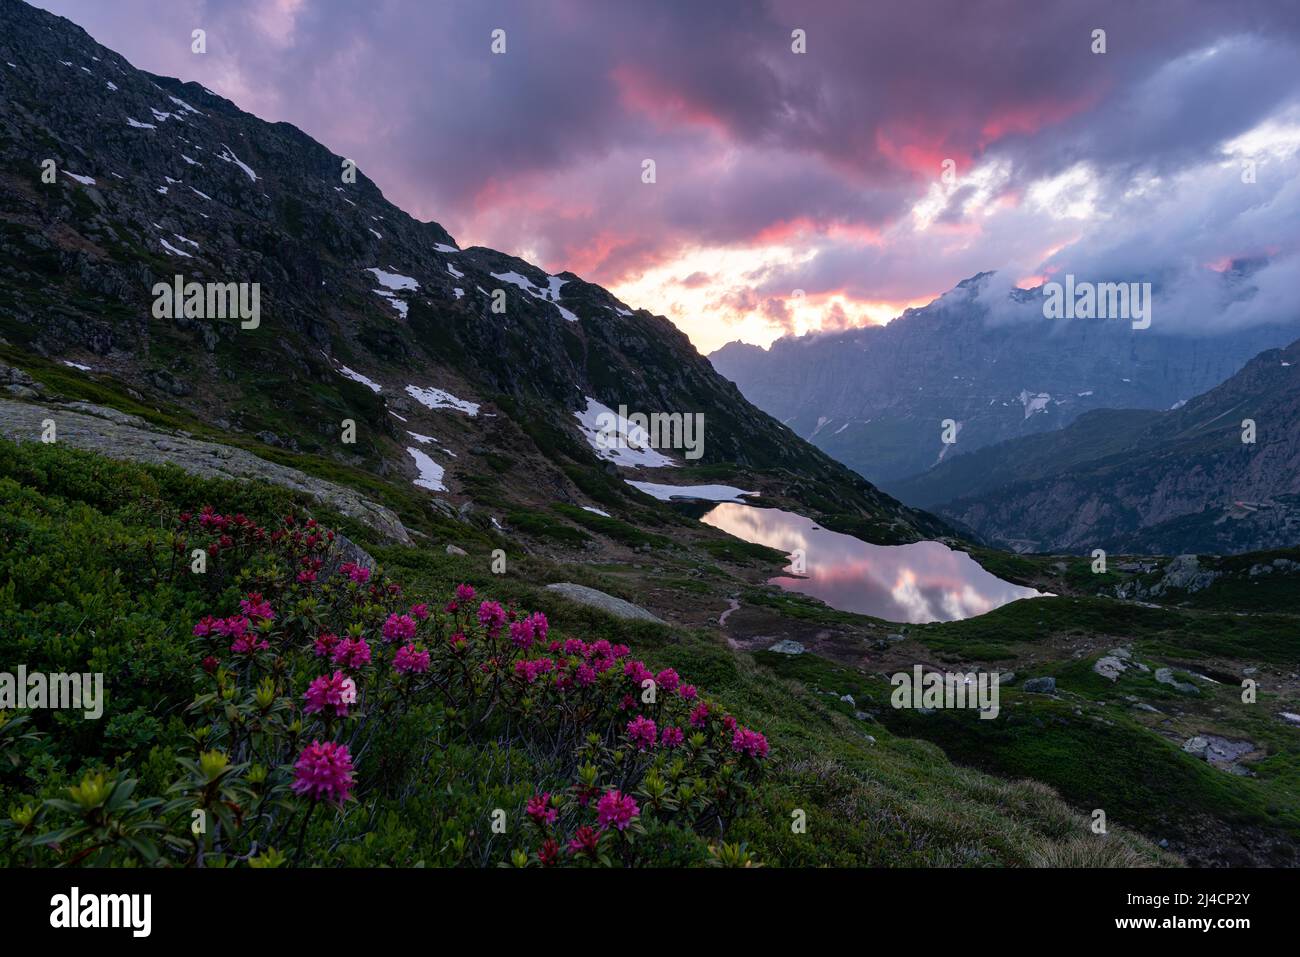 Rusty-leaved alpenrose (Rhododendron ferrugineum), in front of Lake Seeboden at the Susten Pass with evening sky in the canton of Bern, Switzerland Stock Photo